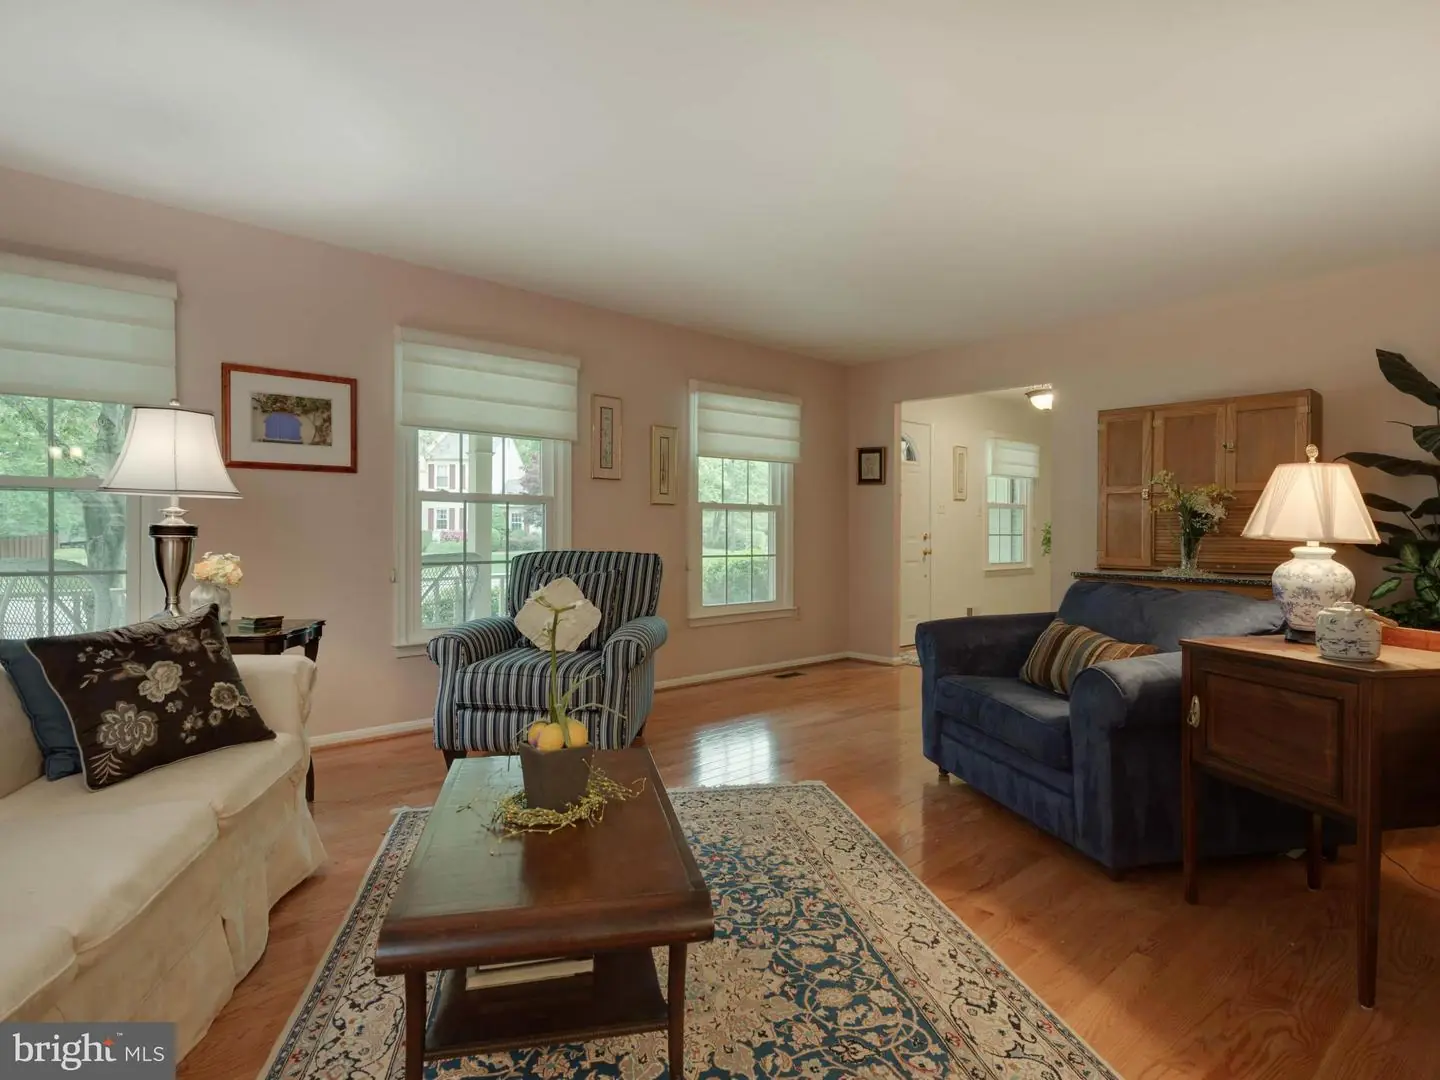 1003702053-300743227146-2021-09-07-04-02-45  |   | Fairfax Delaware Real Estate For Sale | MLS# 1003702053  - Best of Northern Virginia